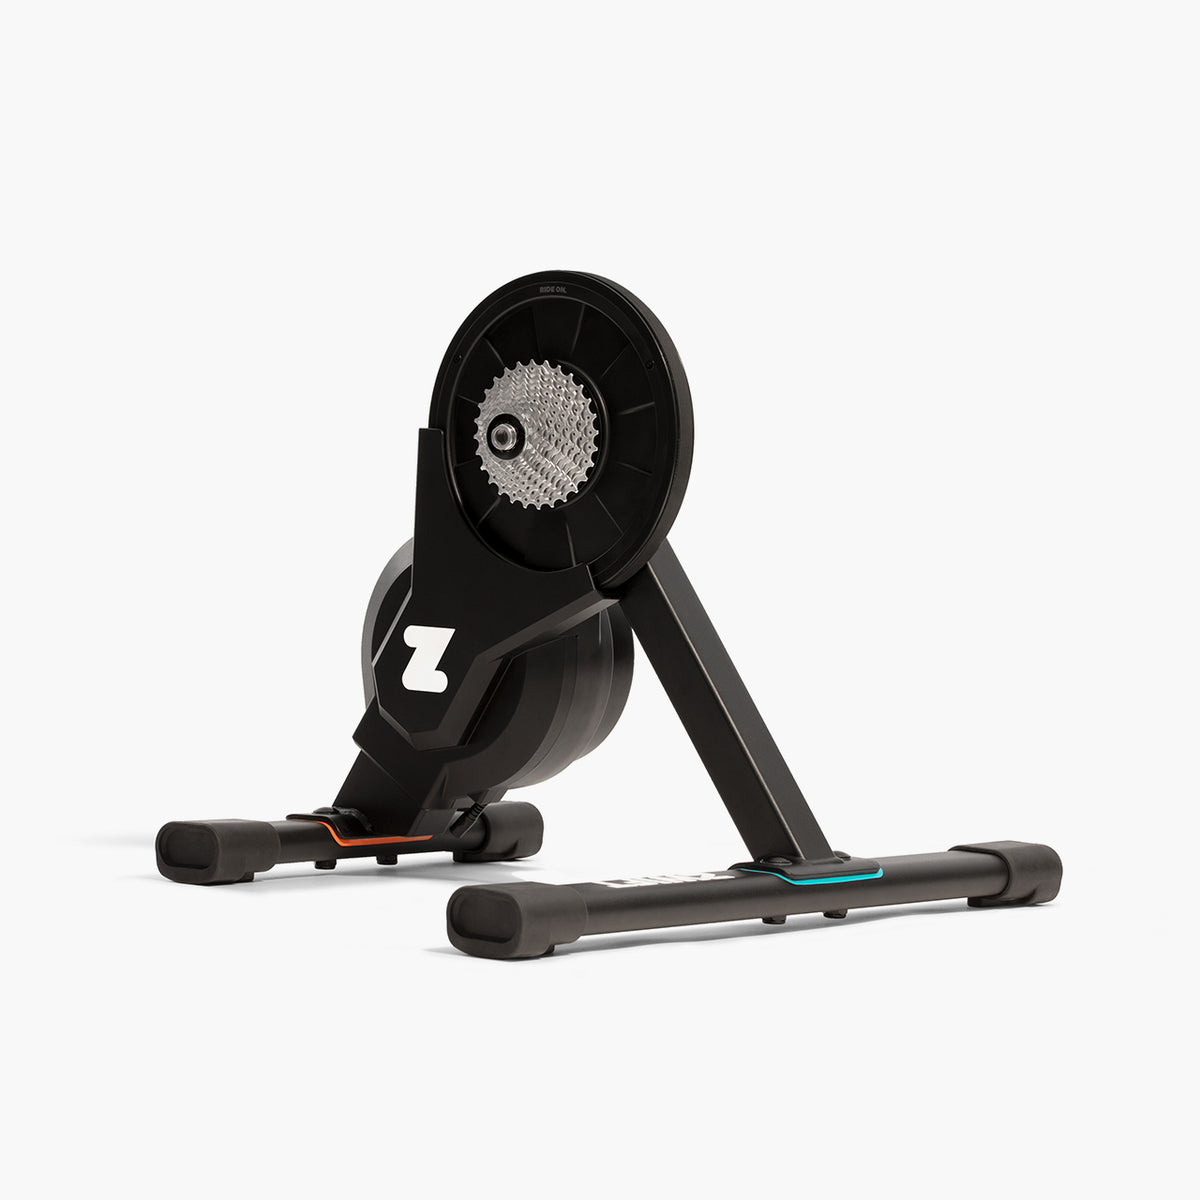 Zwift Hub Smart Turbo Trainer with 11 speed cassette